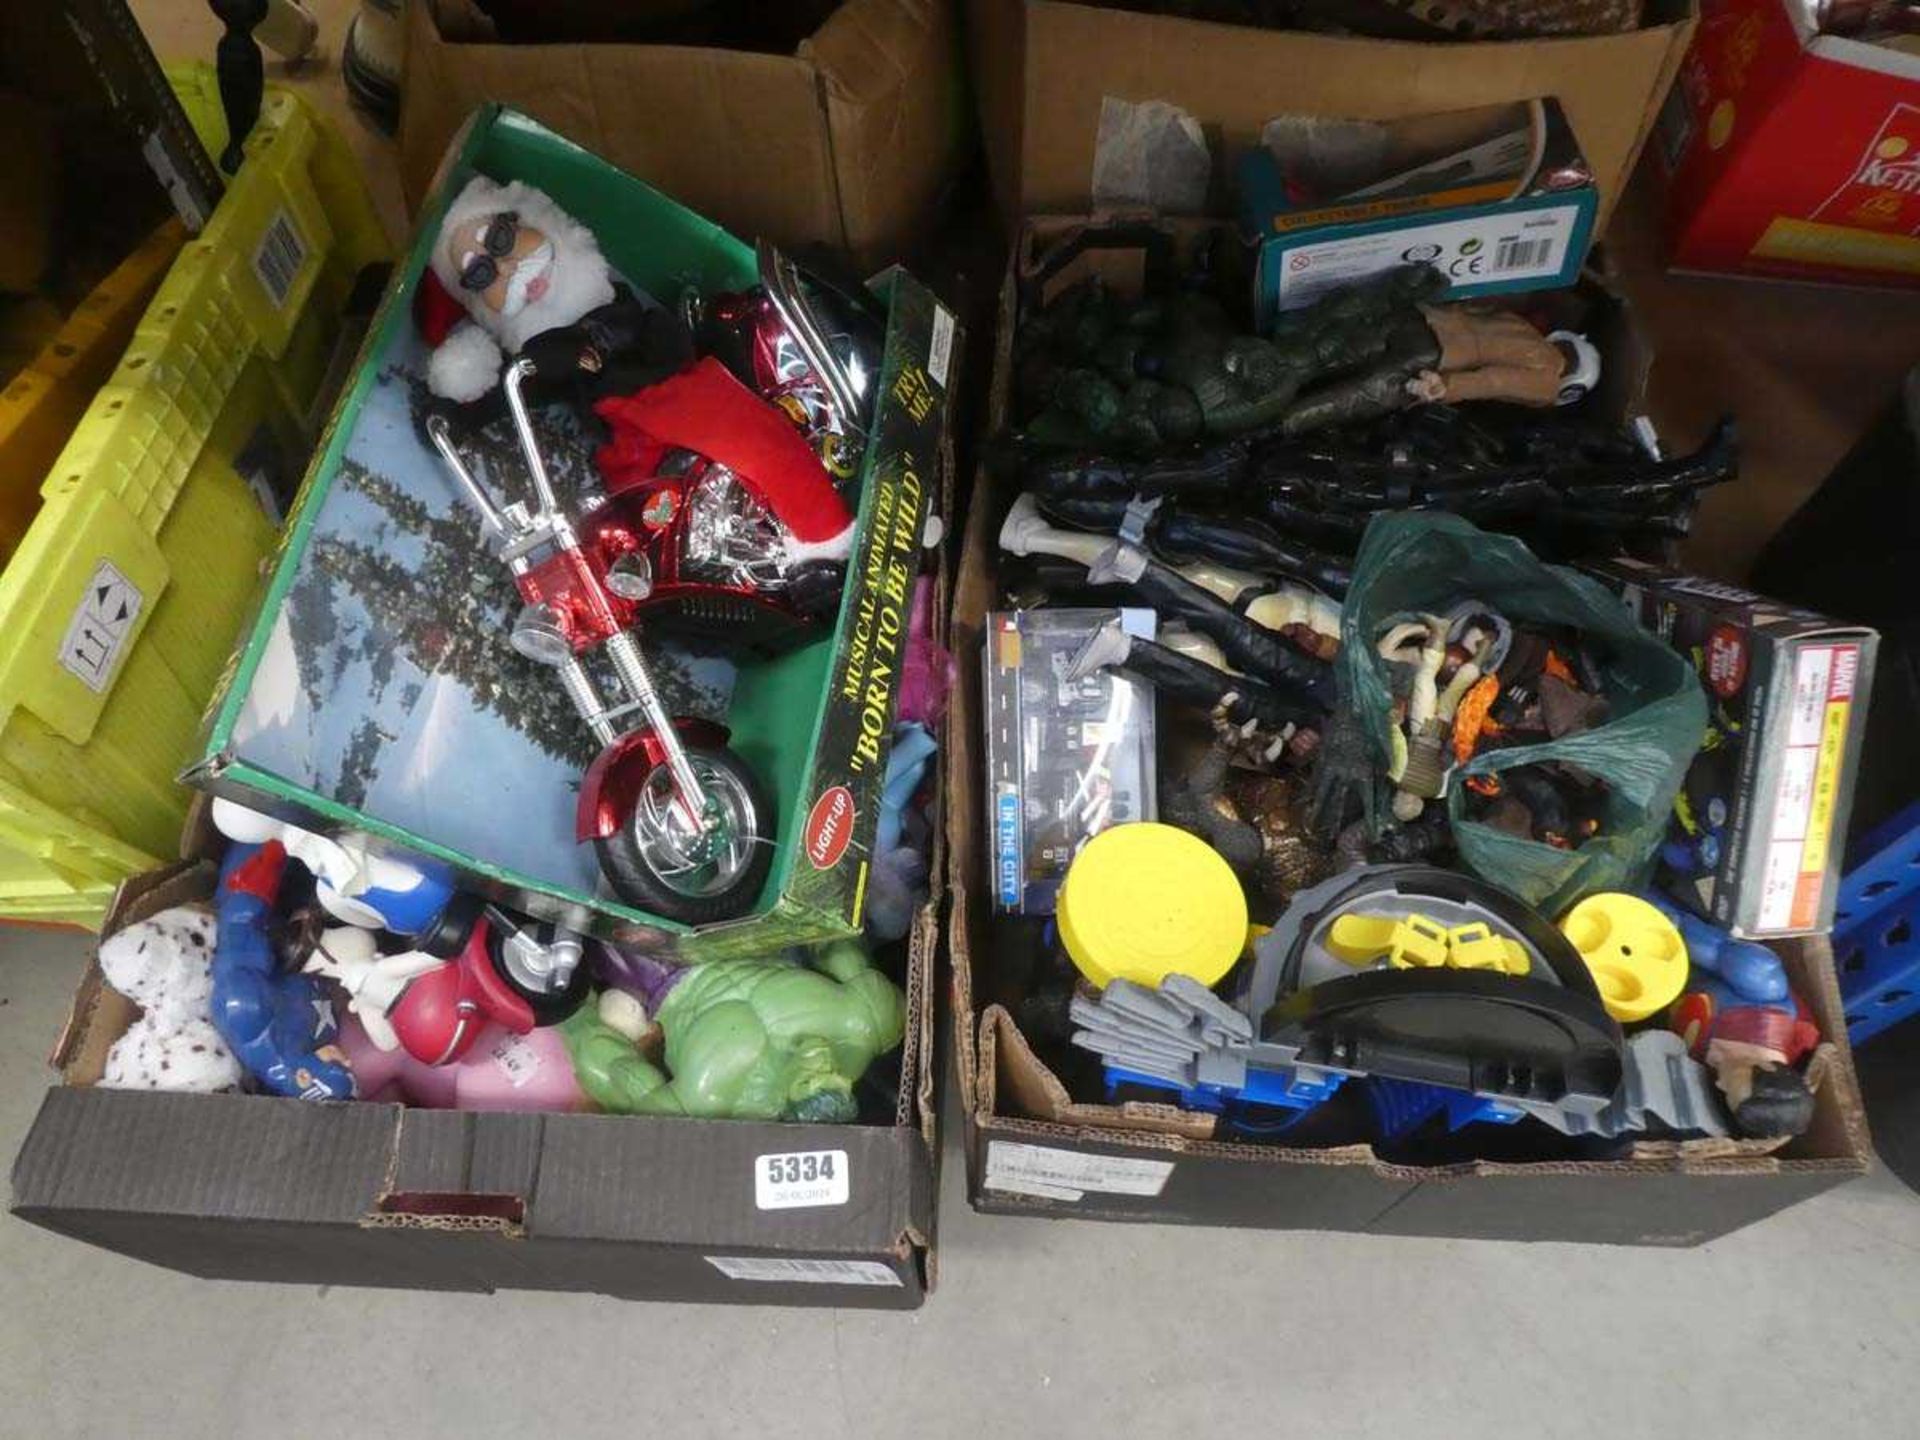 2 boxes containing Action Man, Hulk, My Little Pony, and other toys